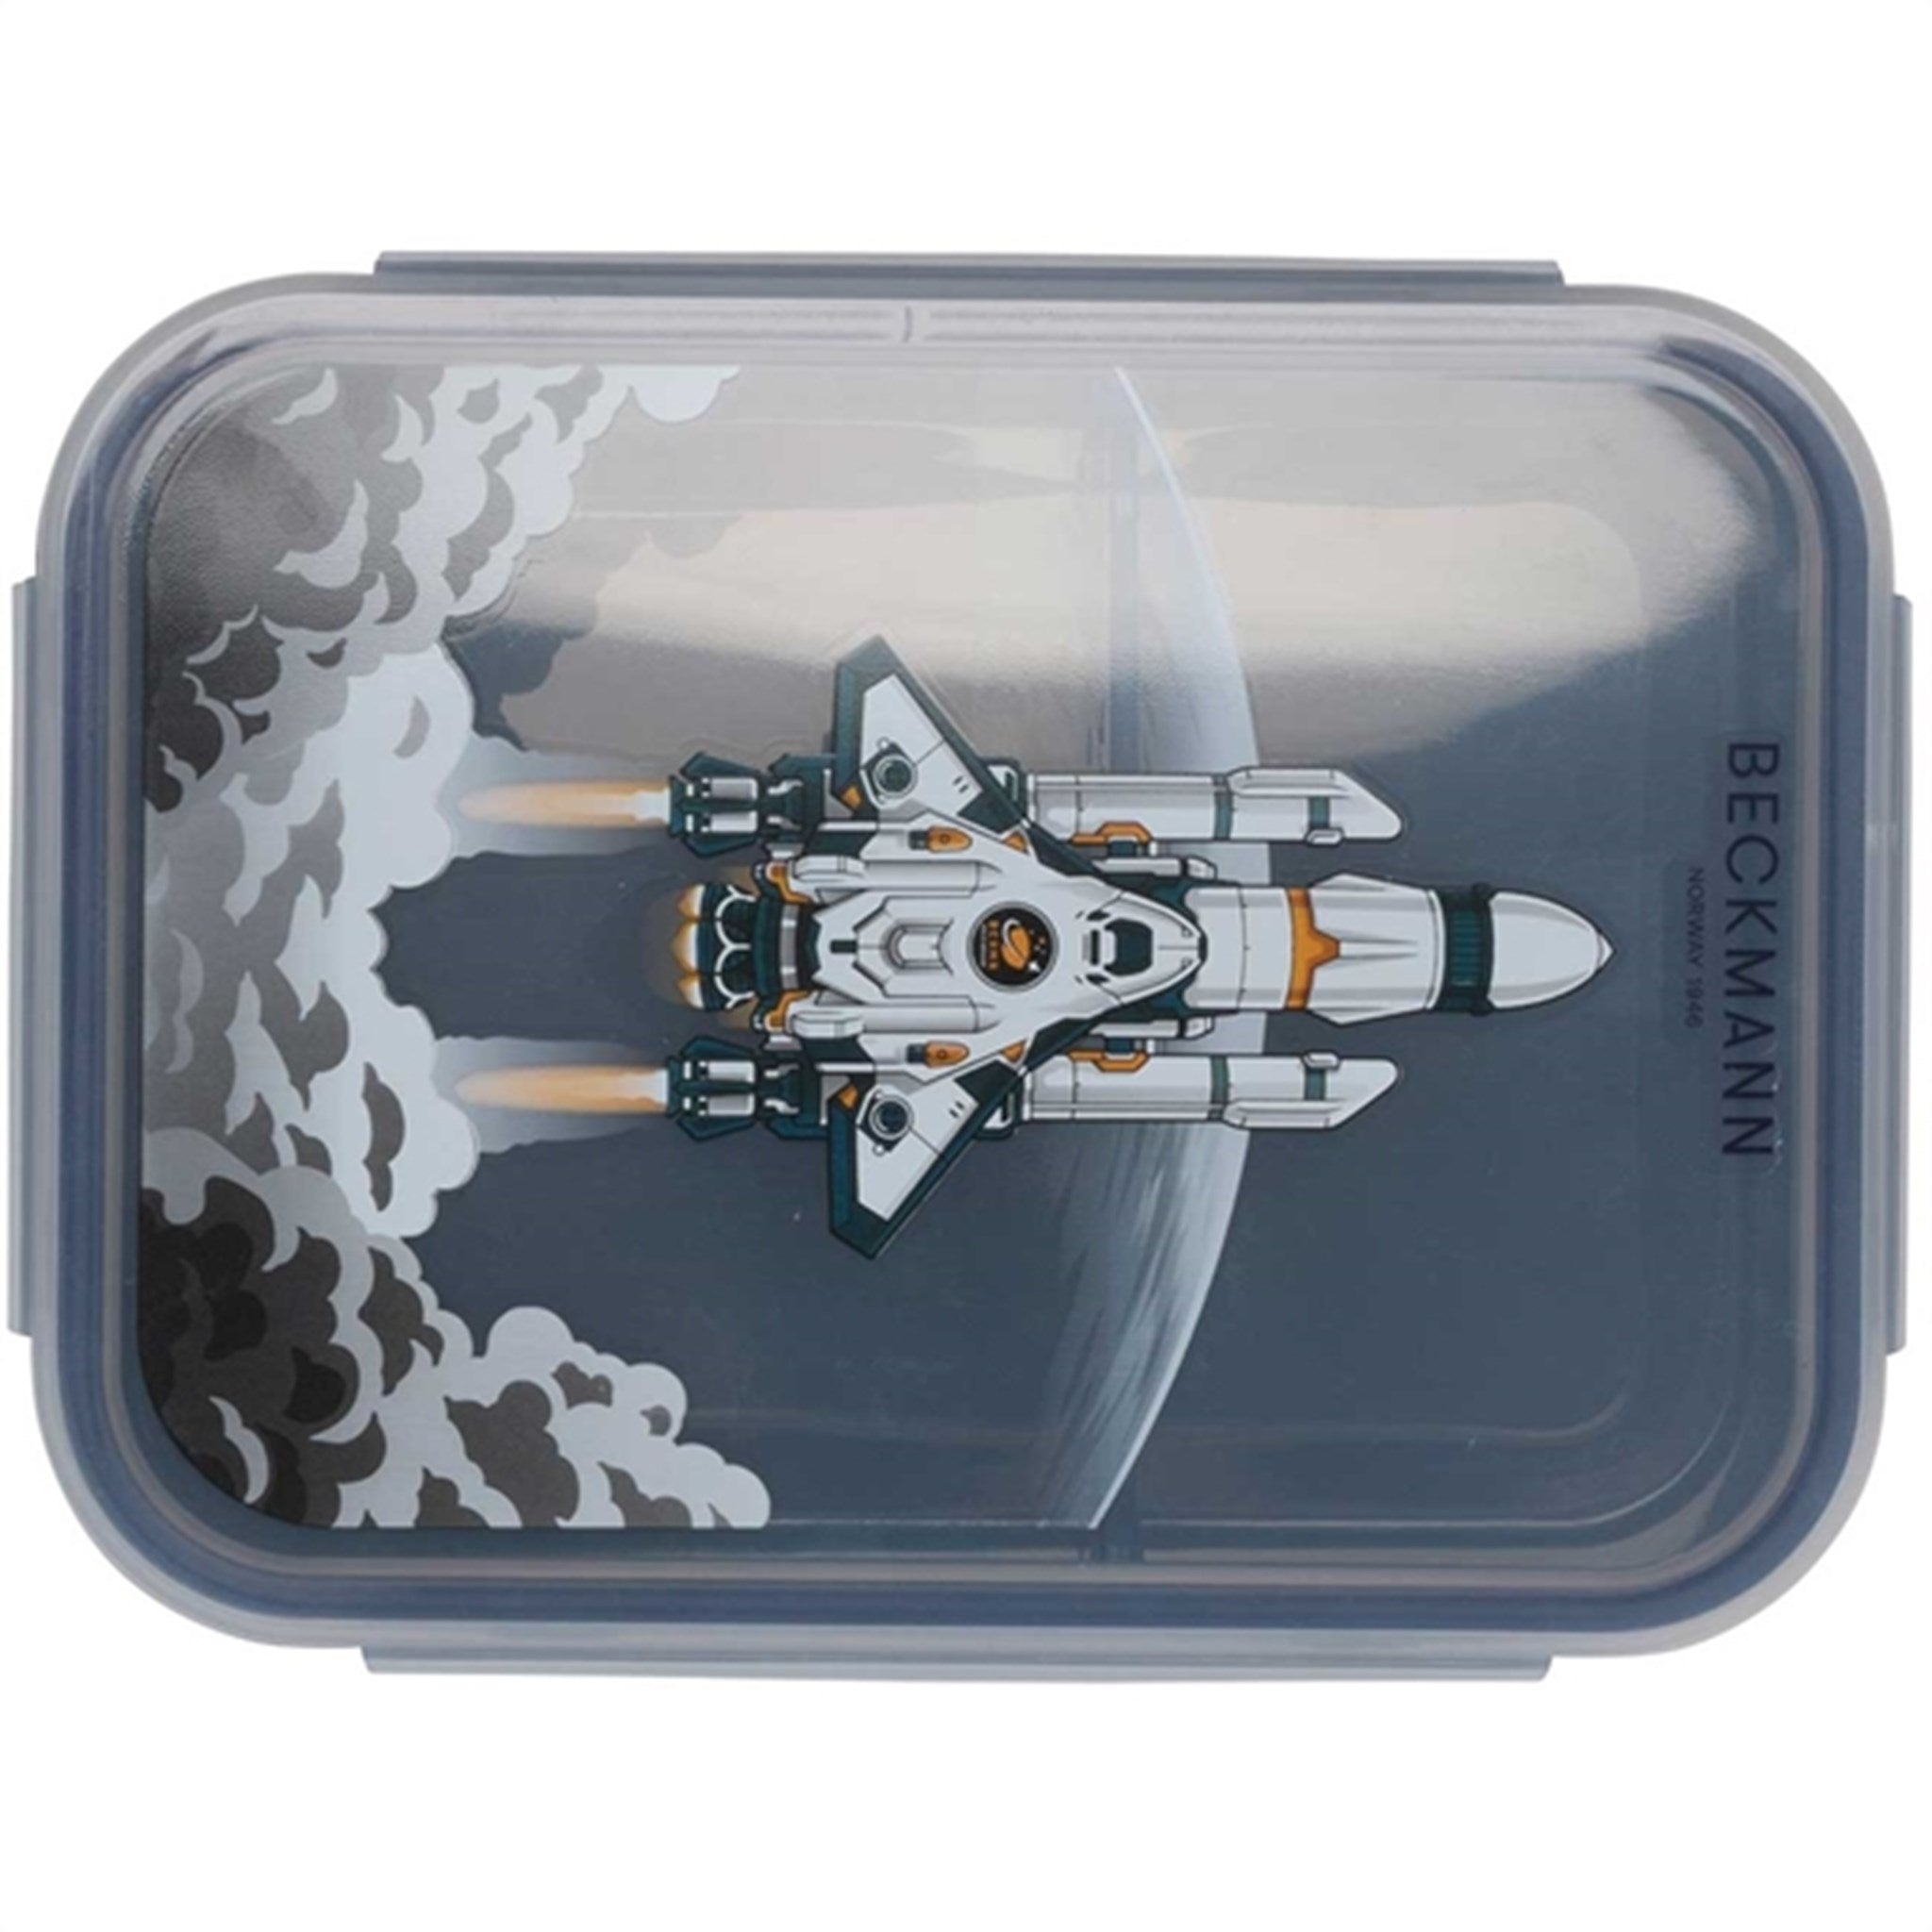 Beckmann Lunch Box Space Mission